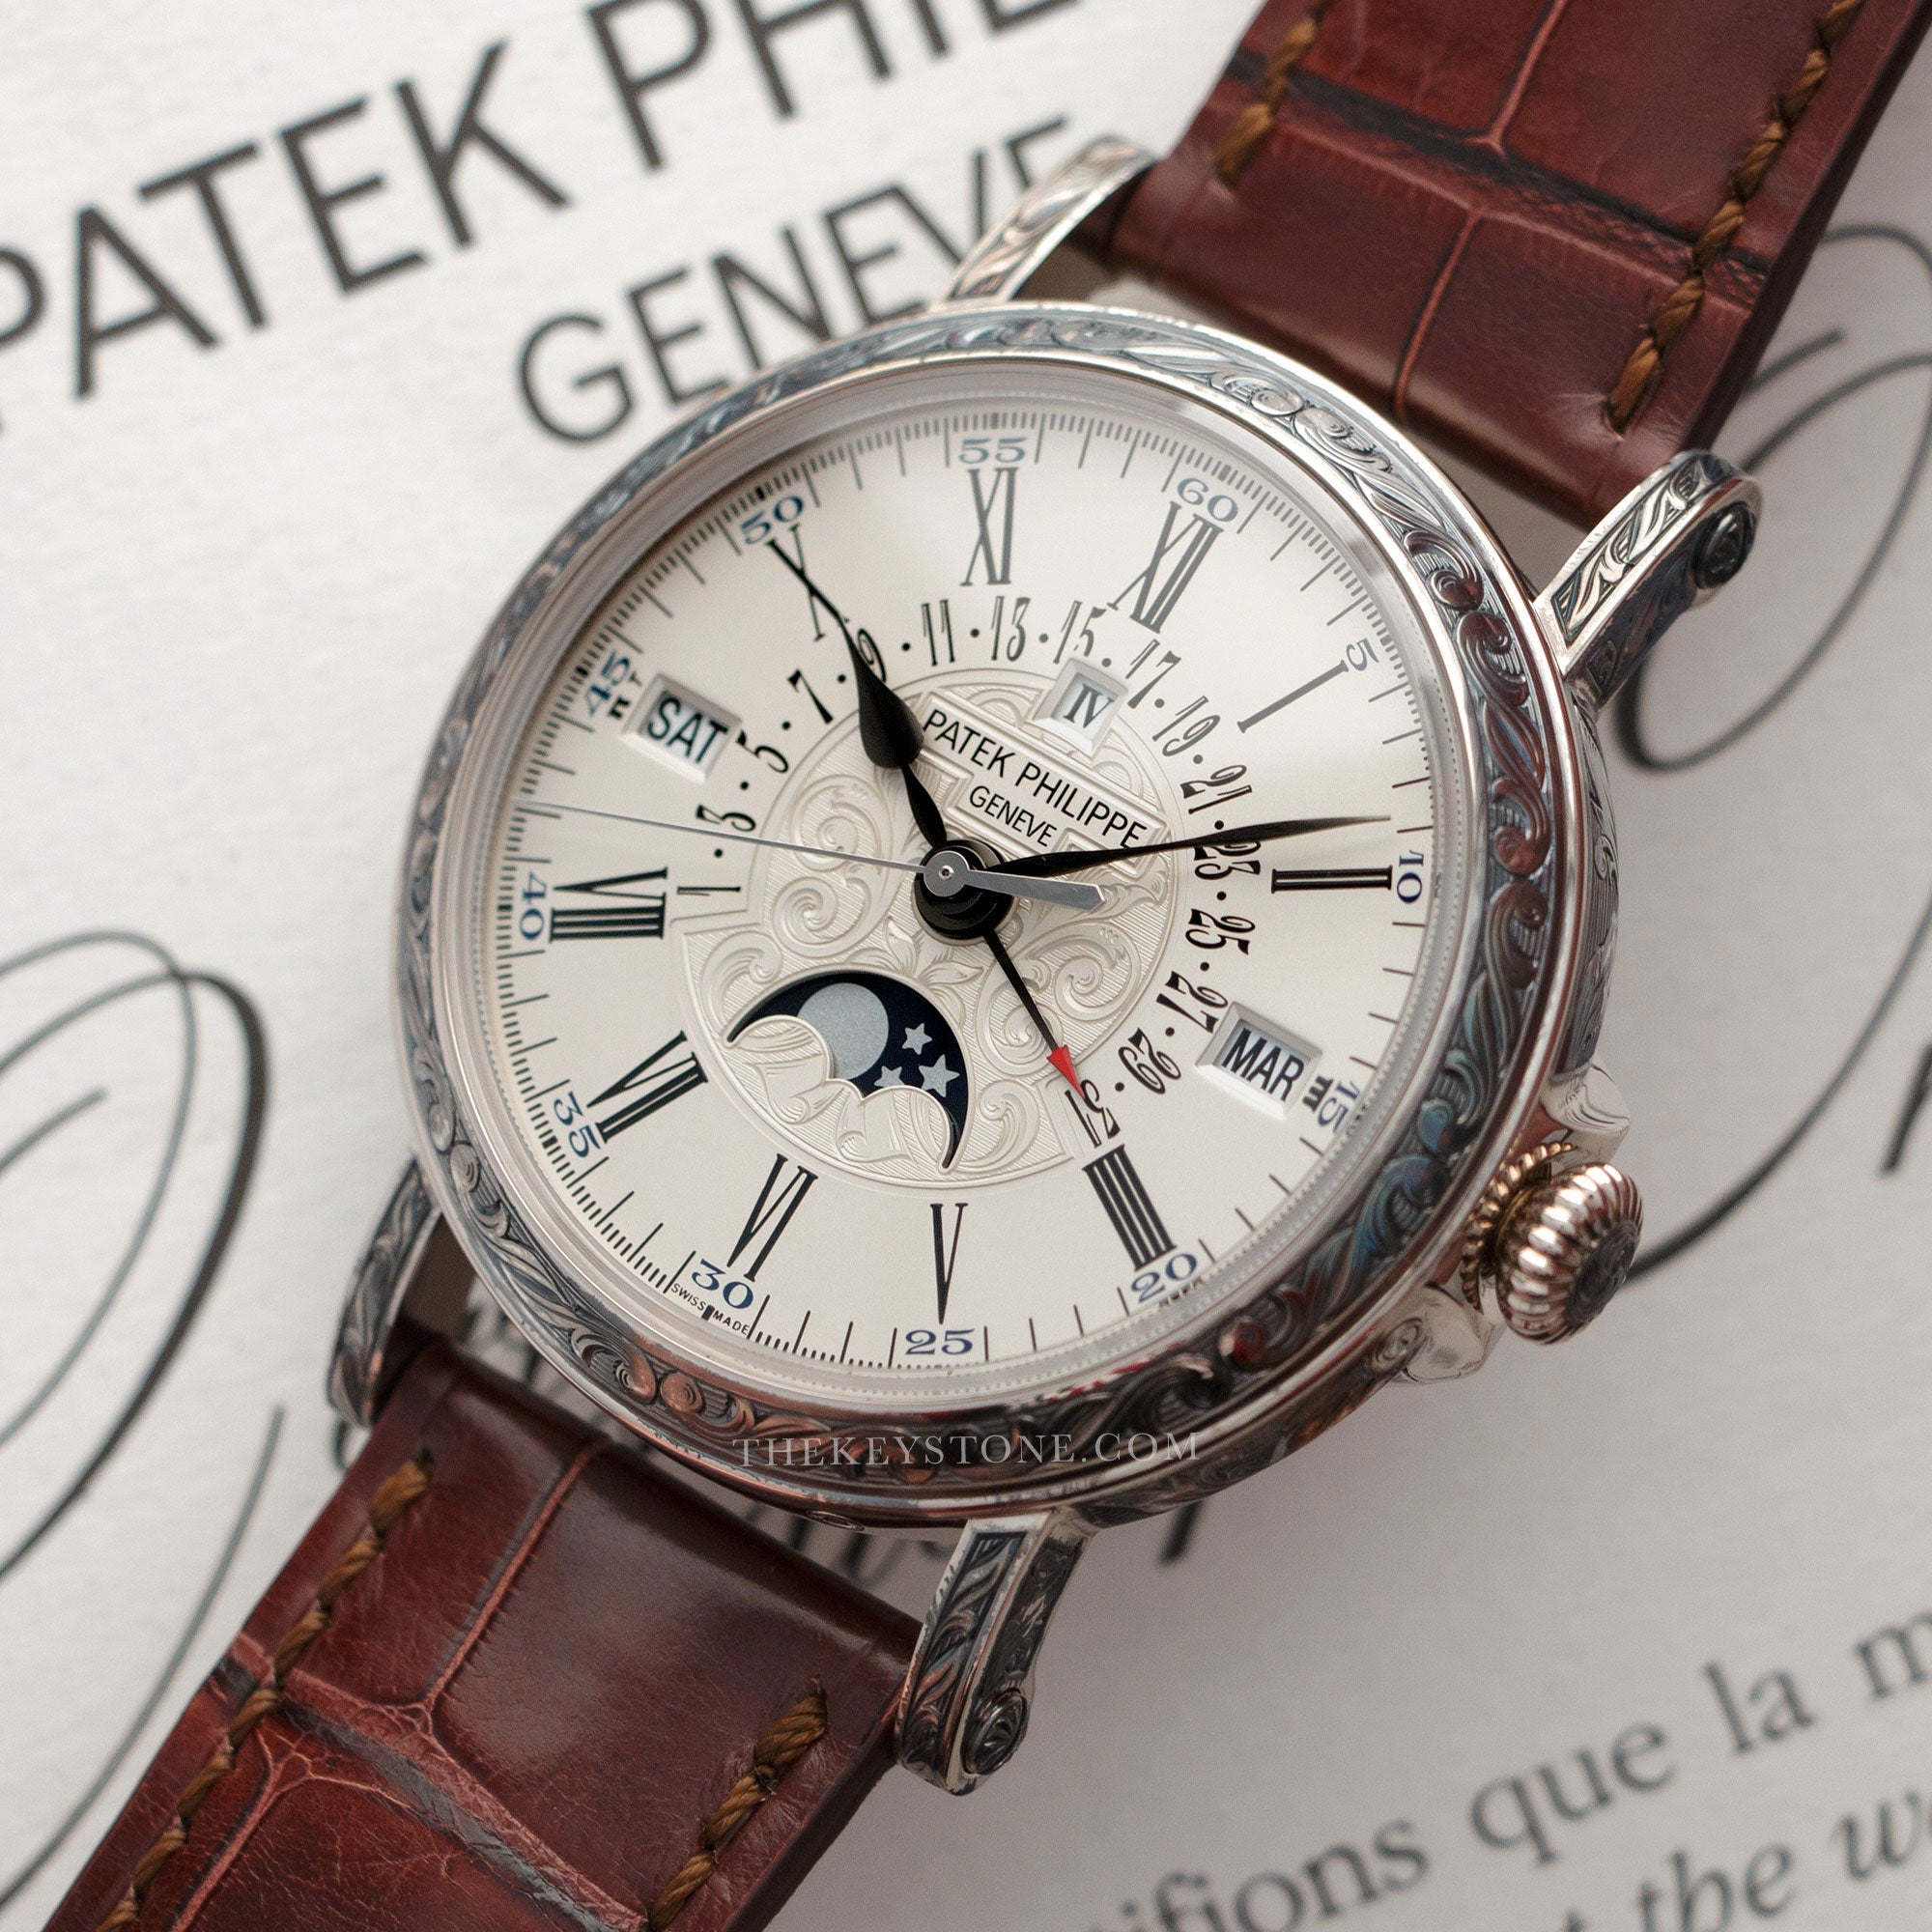 Patek Philippe - Patek Philippe White Gold Perpetual Hand-Engraved Watch Ref. 5160 - The Keystone Watches